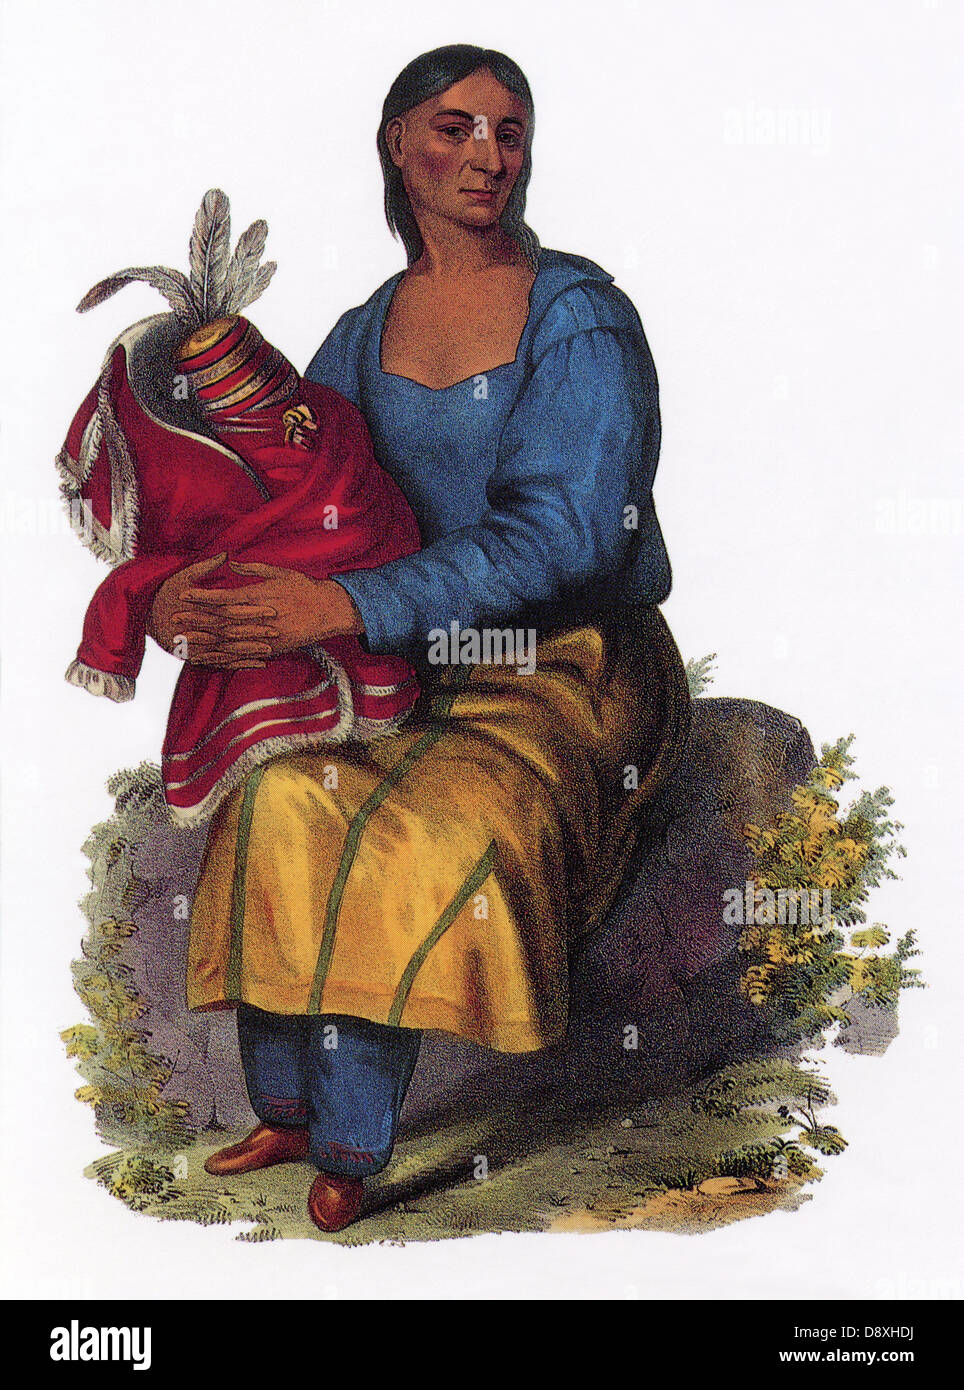 Chippeway Native American widow, 1837 Banque D'Images